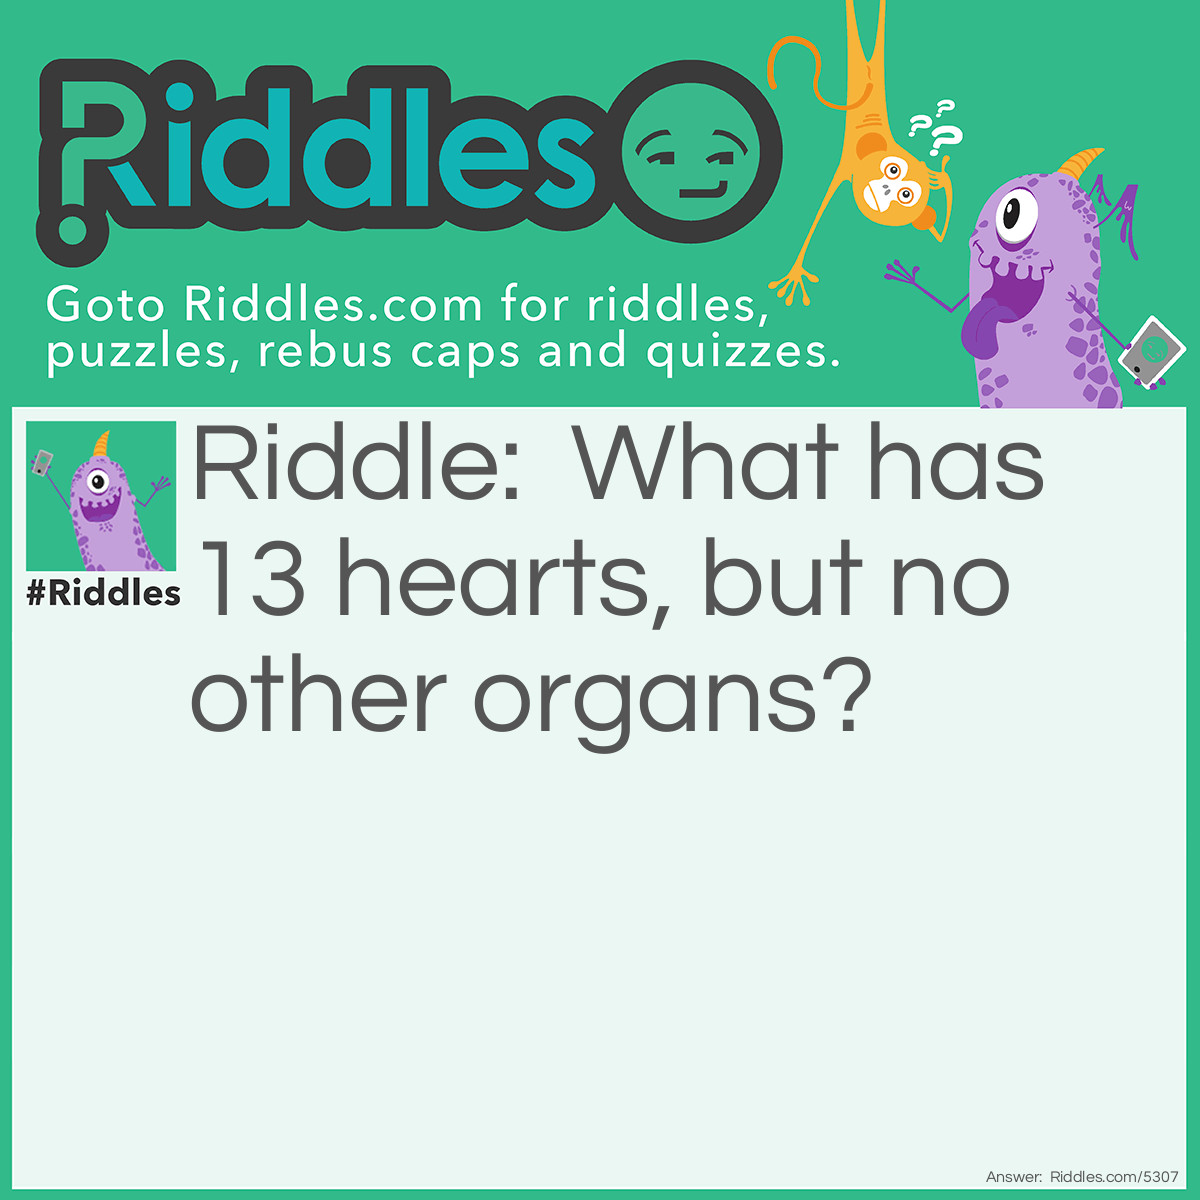 Riddle: What has 13 hearts but no other organs? Answer: A deck of cards.